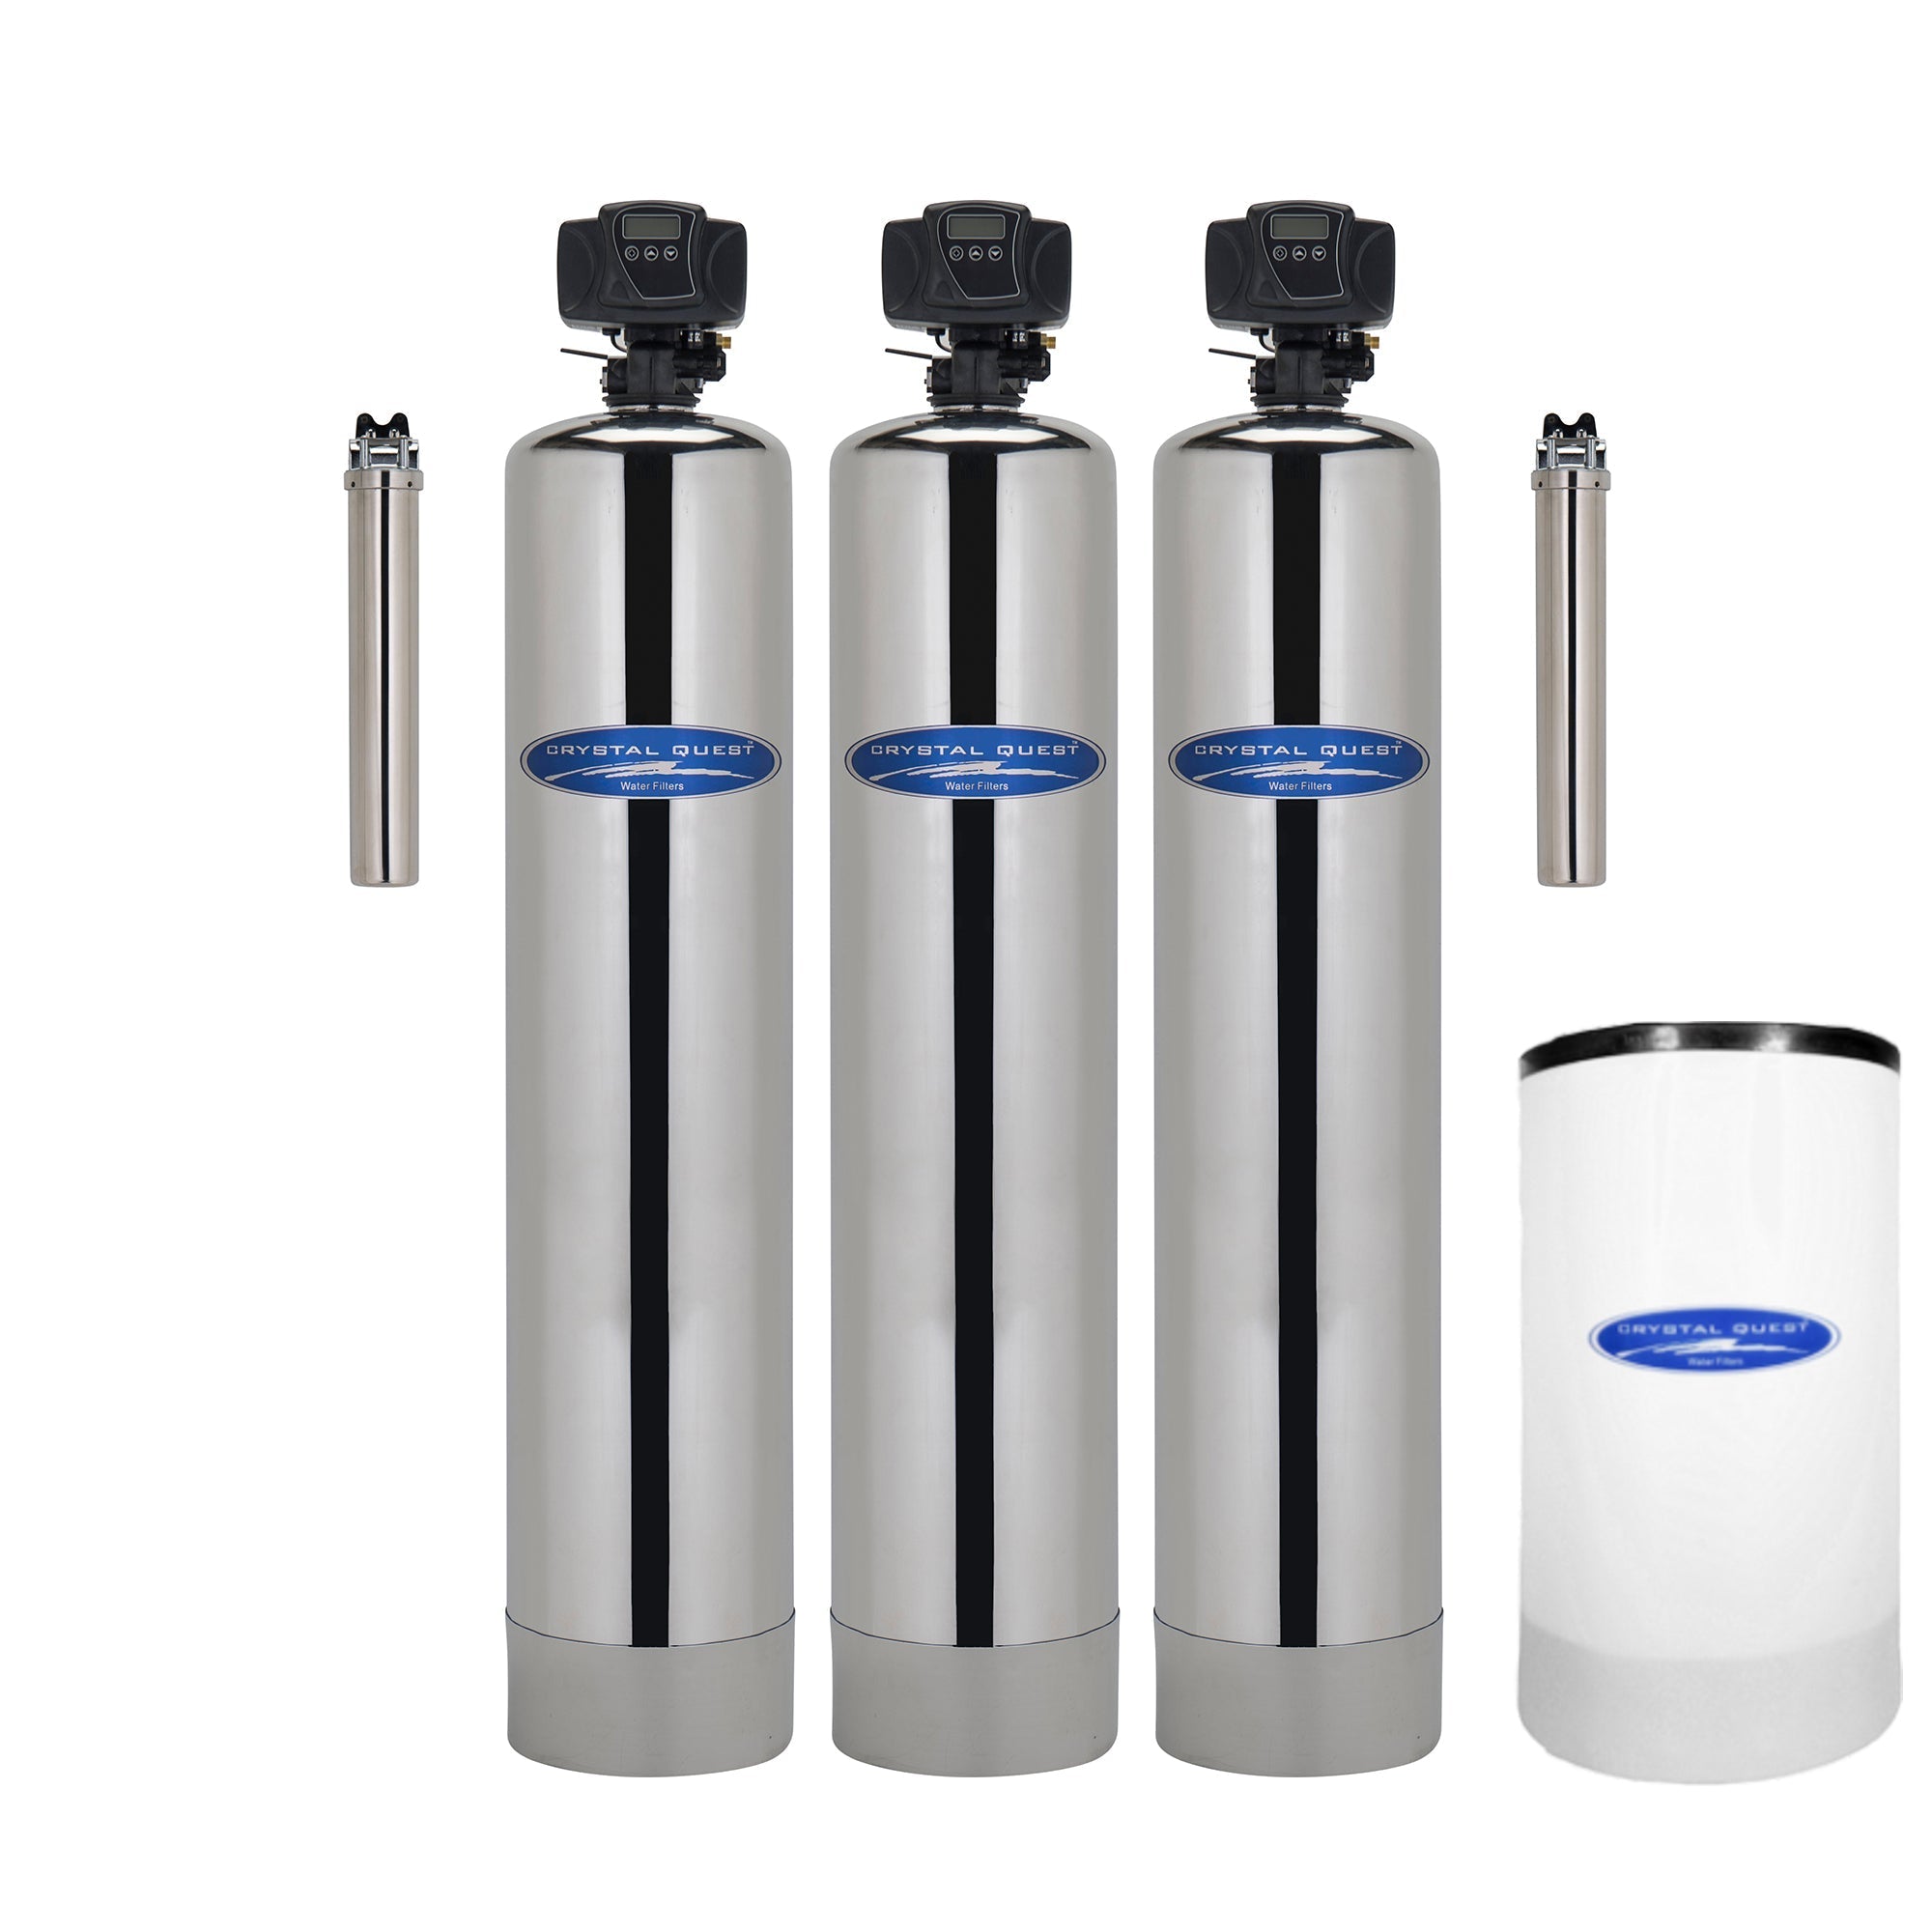 Add SMART Filter and Softener / Stainless Steel / 1.5 Iron Whole House Water Filter - Whole House Water Filters - Crystal Quest